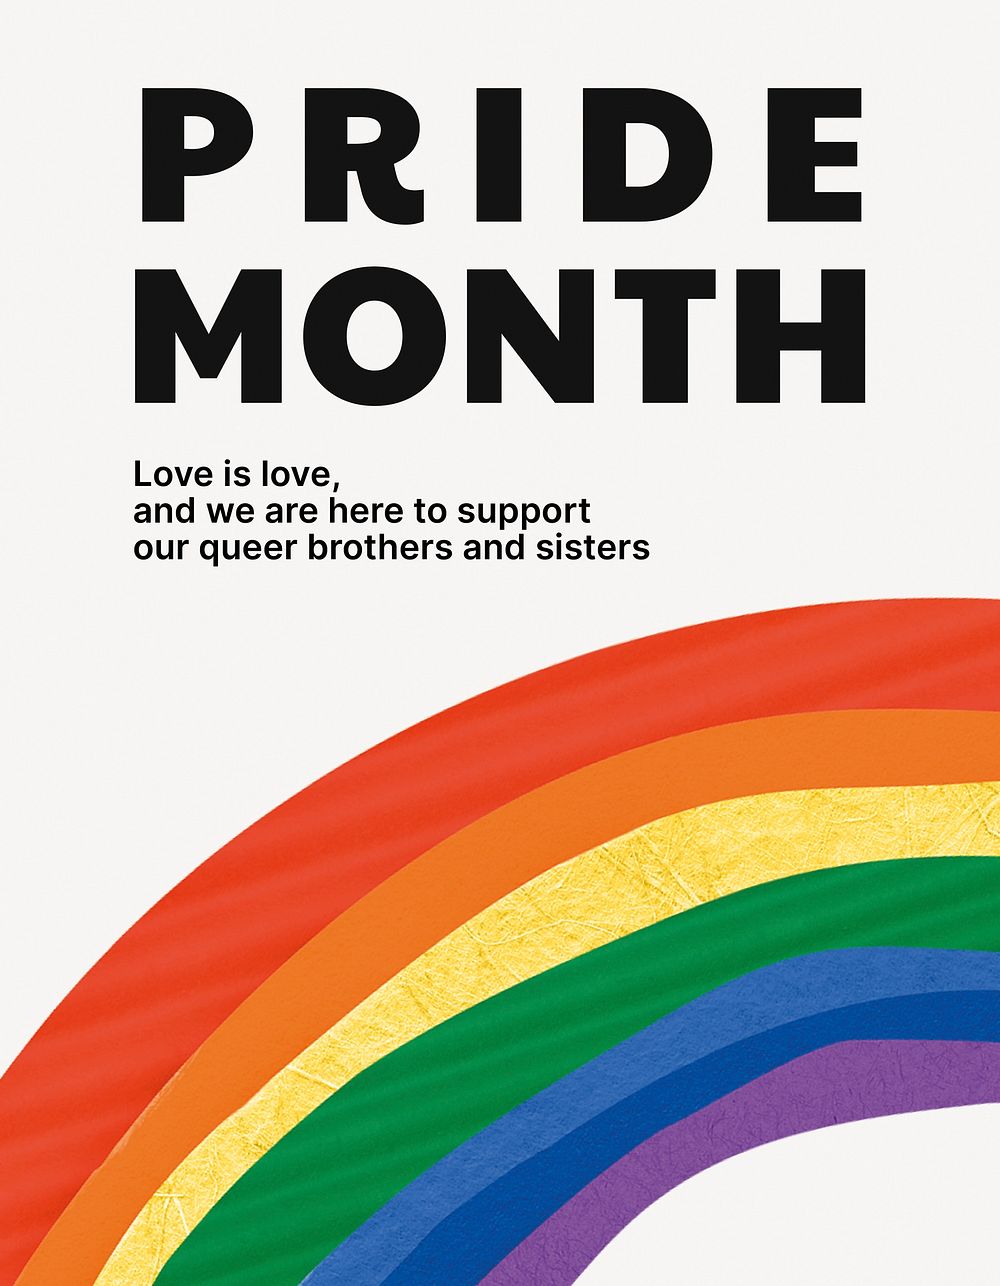 Pride month rainbow flyer template, LGBTQ community support campaign psd